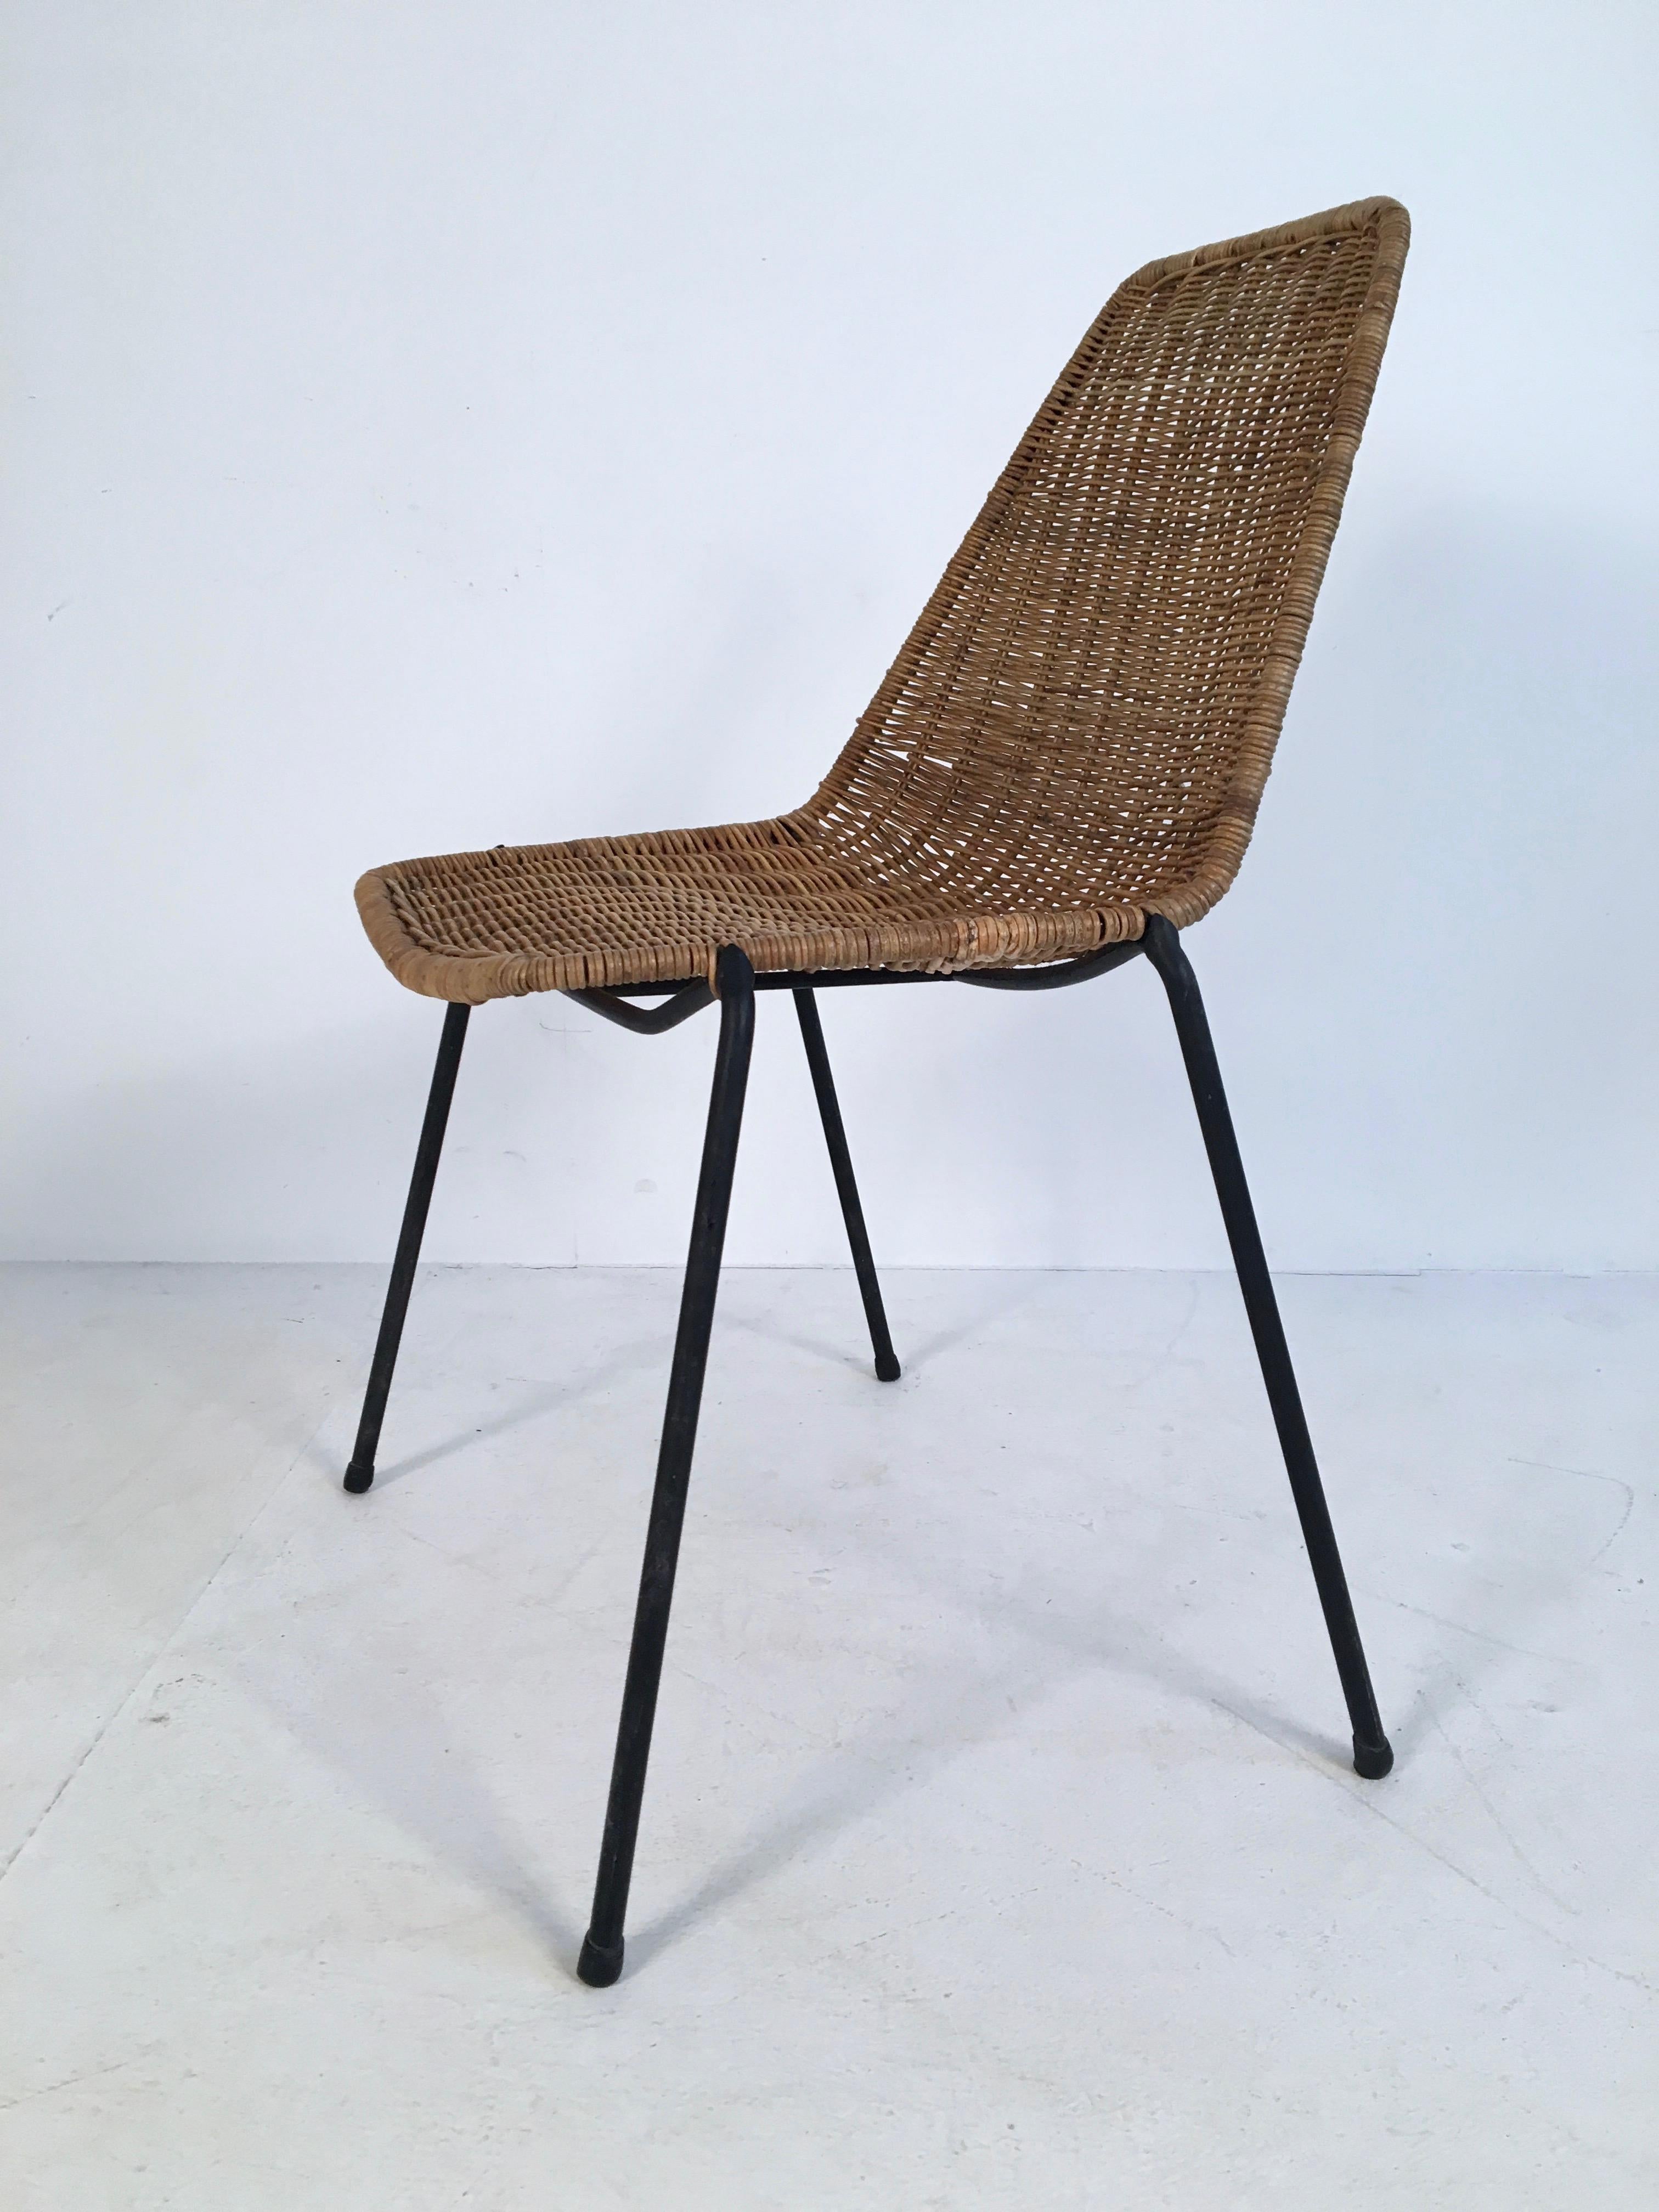 2 Midcentury Wicker Chairs by Campo & Graffi for Home Torino, Italy, circa 1950 For Sale 2